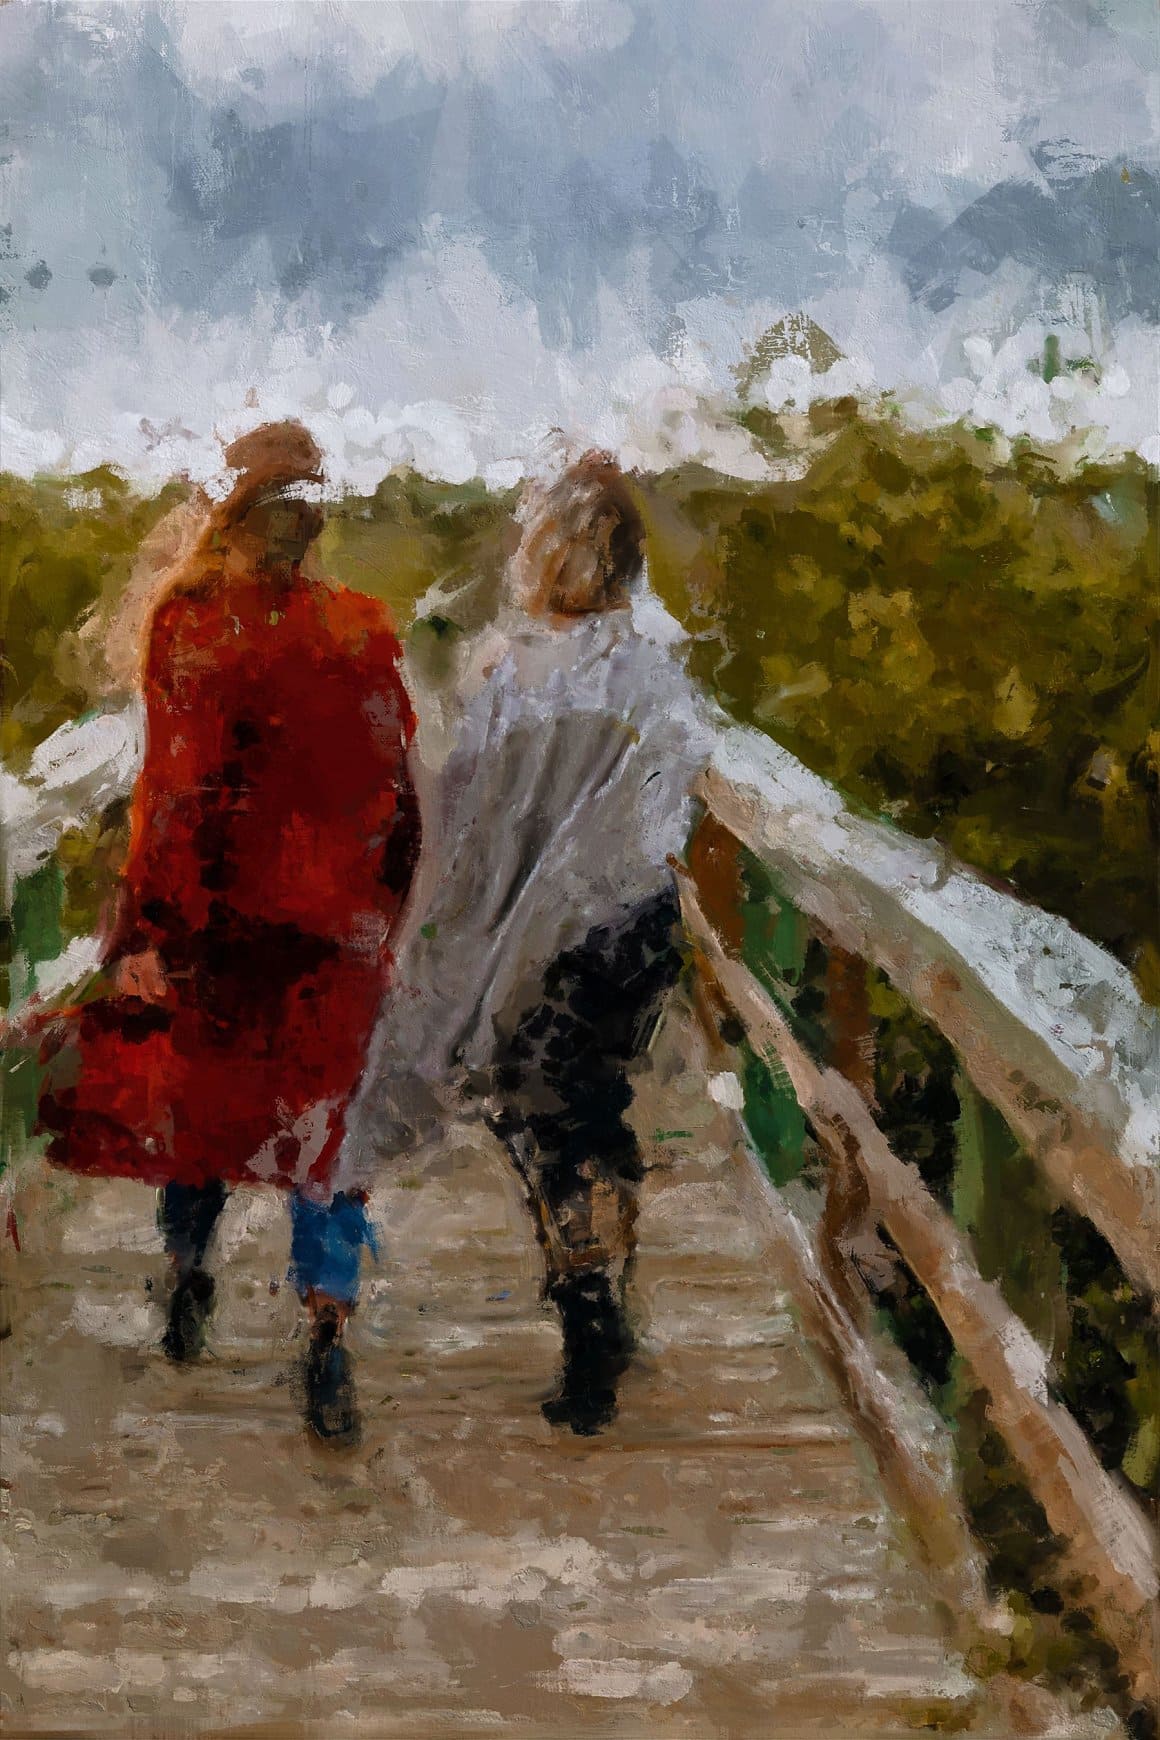 The image of two girls walking on the bridge is painted with Photoshop effect.